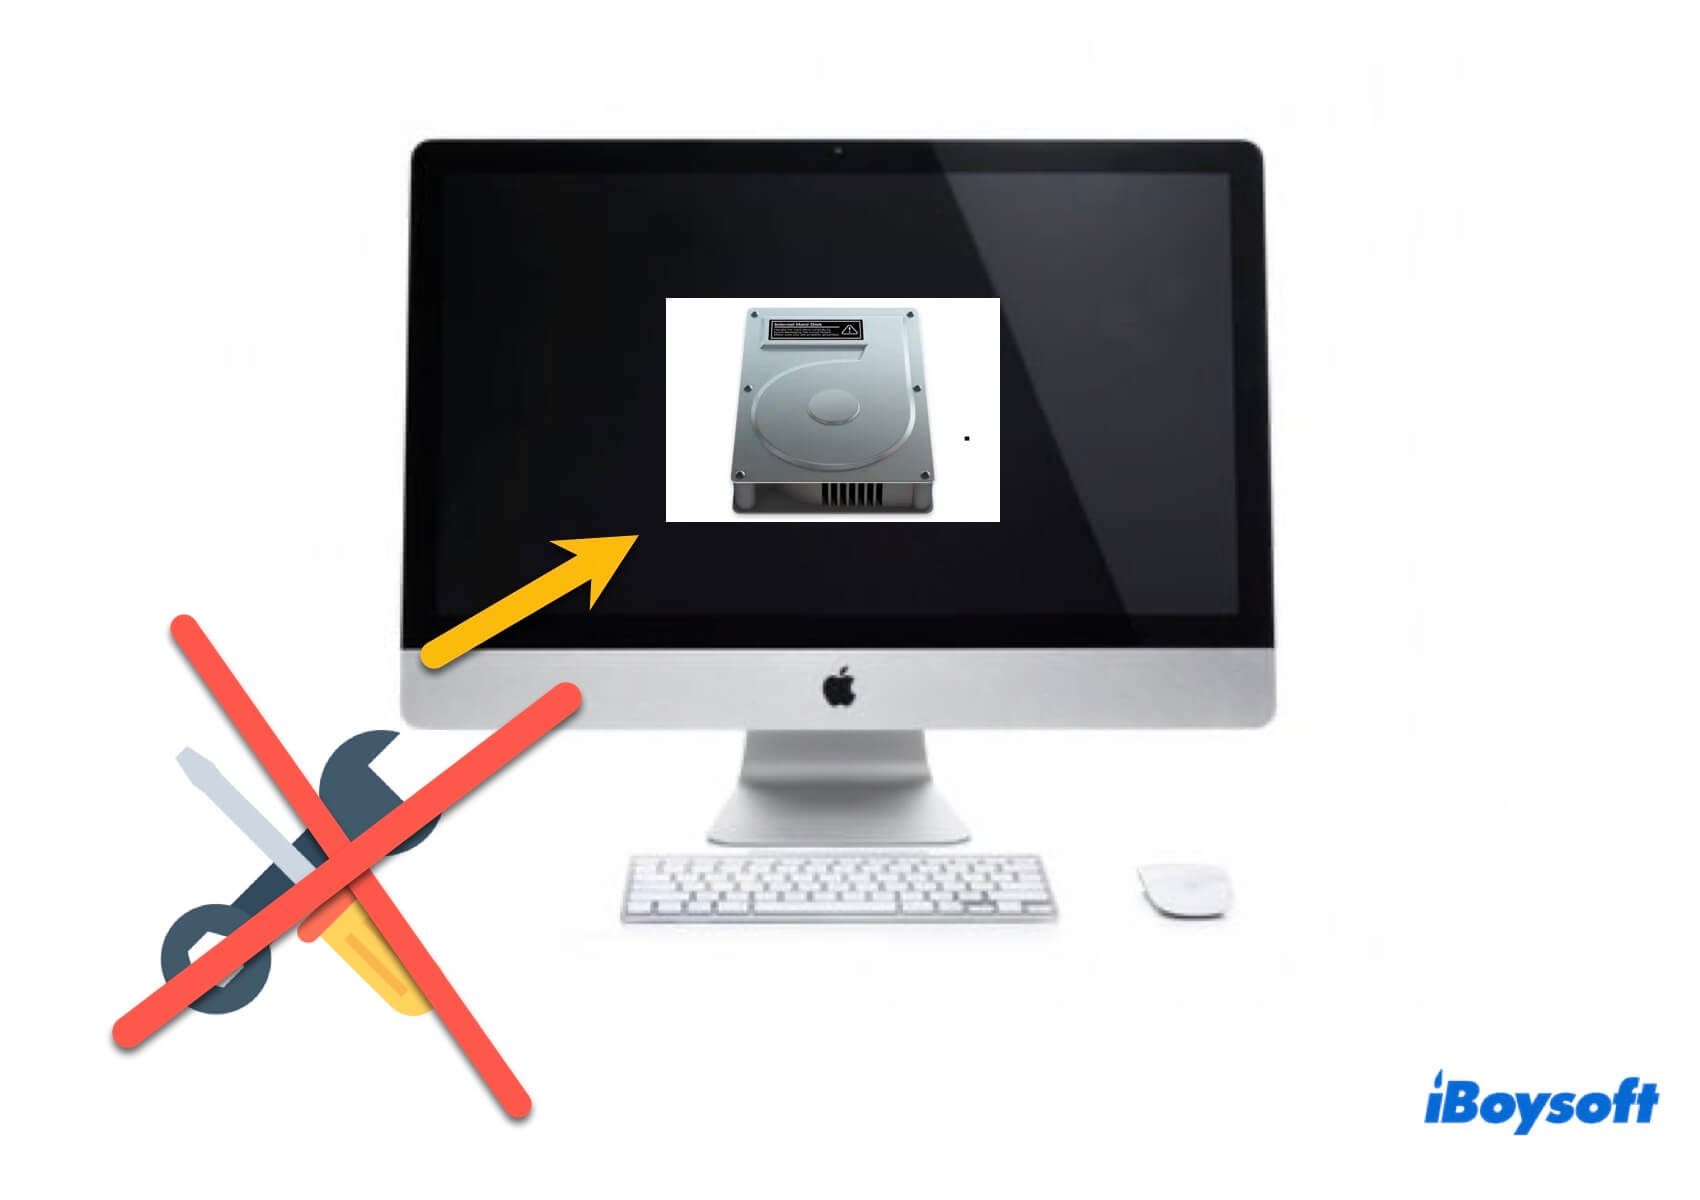 Avoid using Disk utility or other repair tools